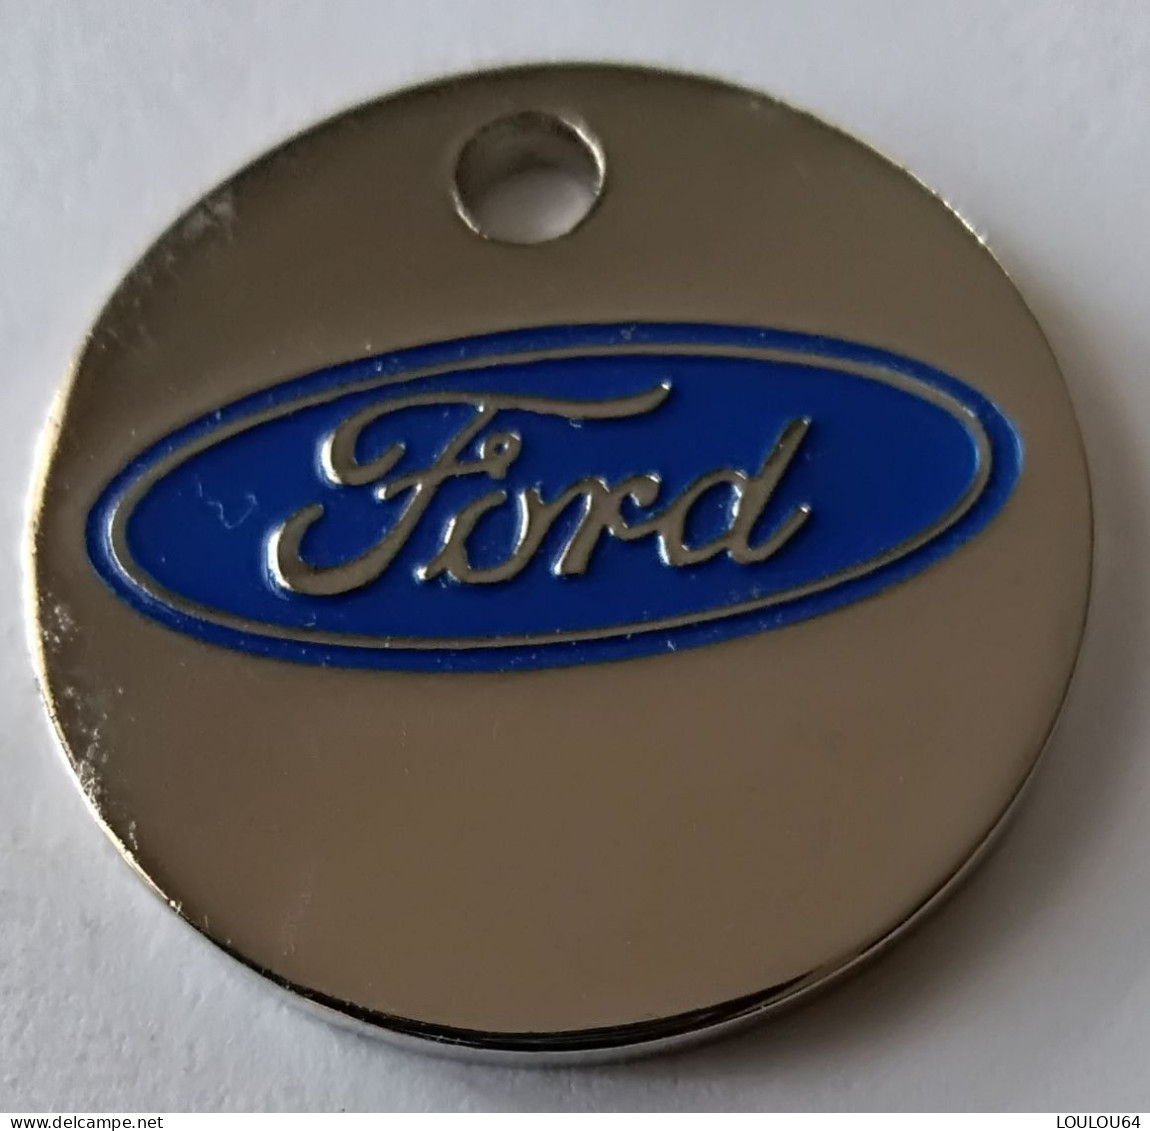 Jeton De Caddie - Automobiles - FORD - TROYES - CHAUMONT - ROMILLY - Métal - - Trolley Token/Shopping Trolley Chip